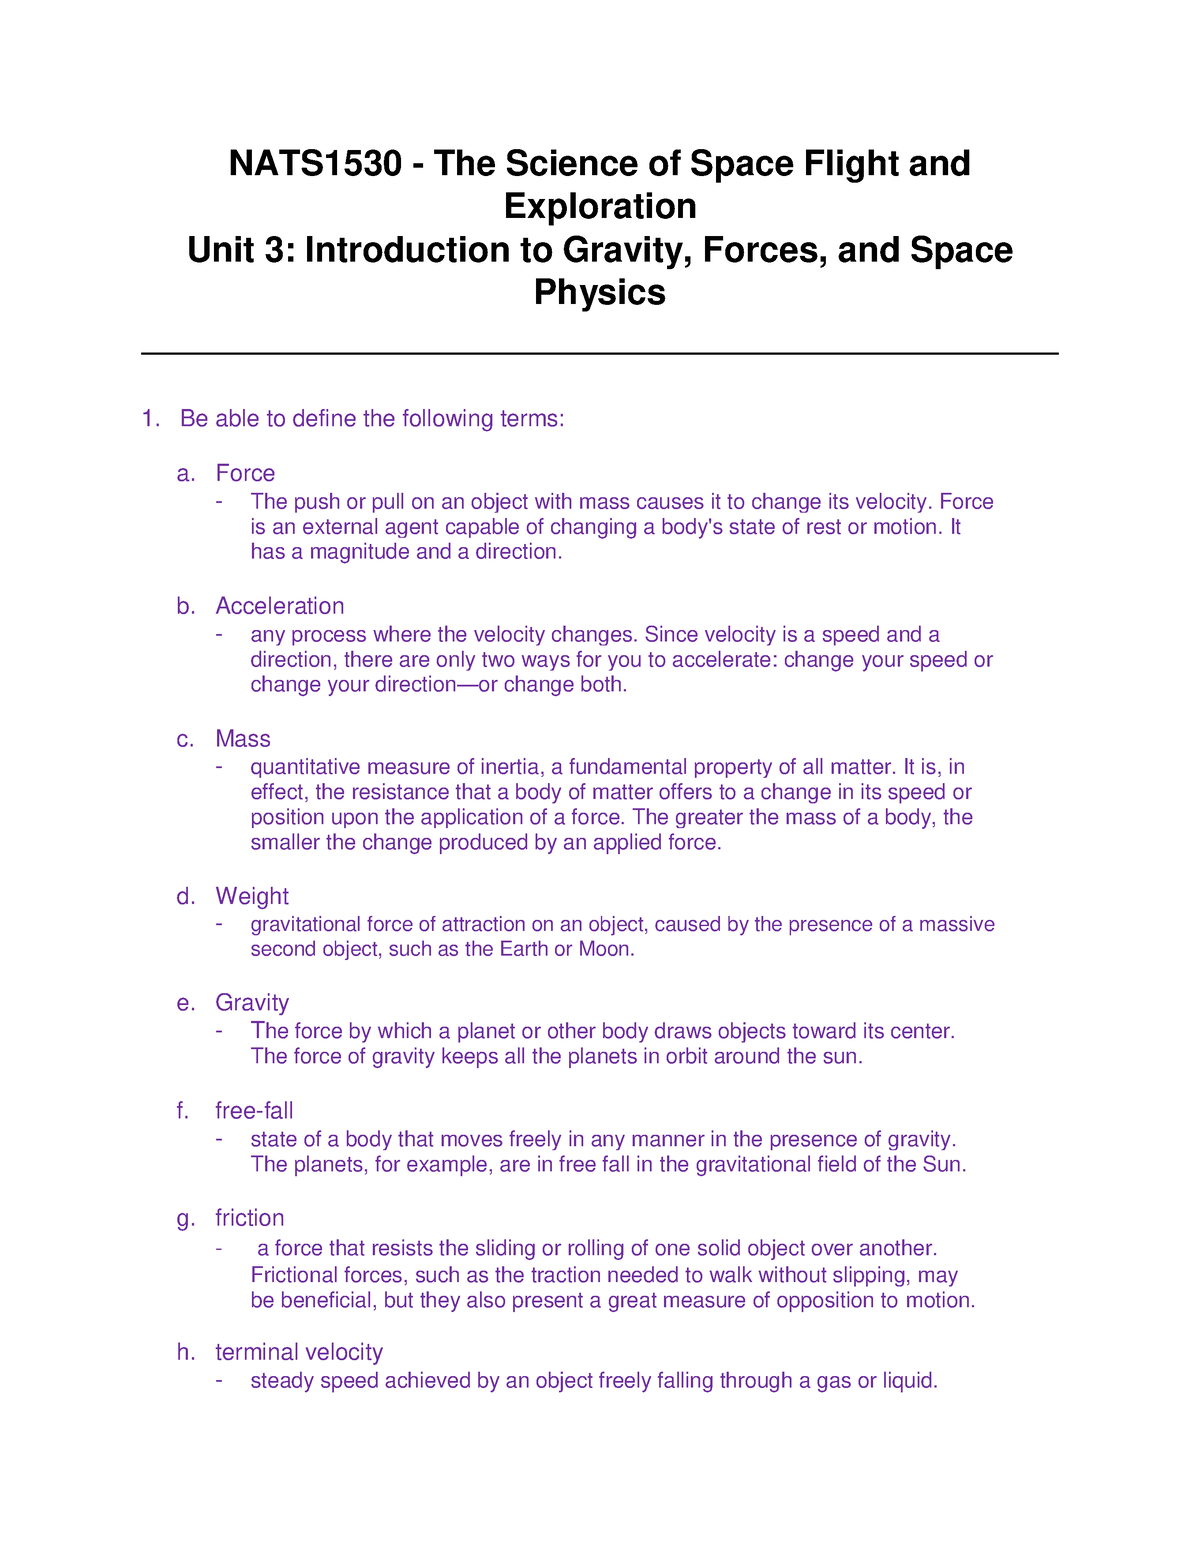 NATS 1530 UNIT 3,4,5 EXAM PREP - NATS1530 - The Science of Space Flight ...